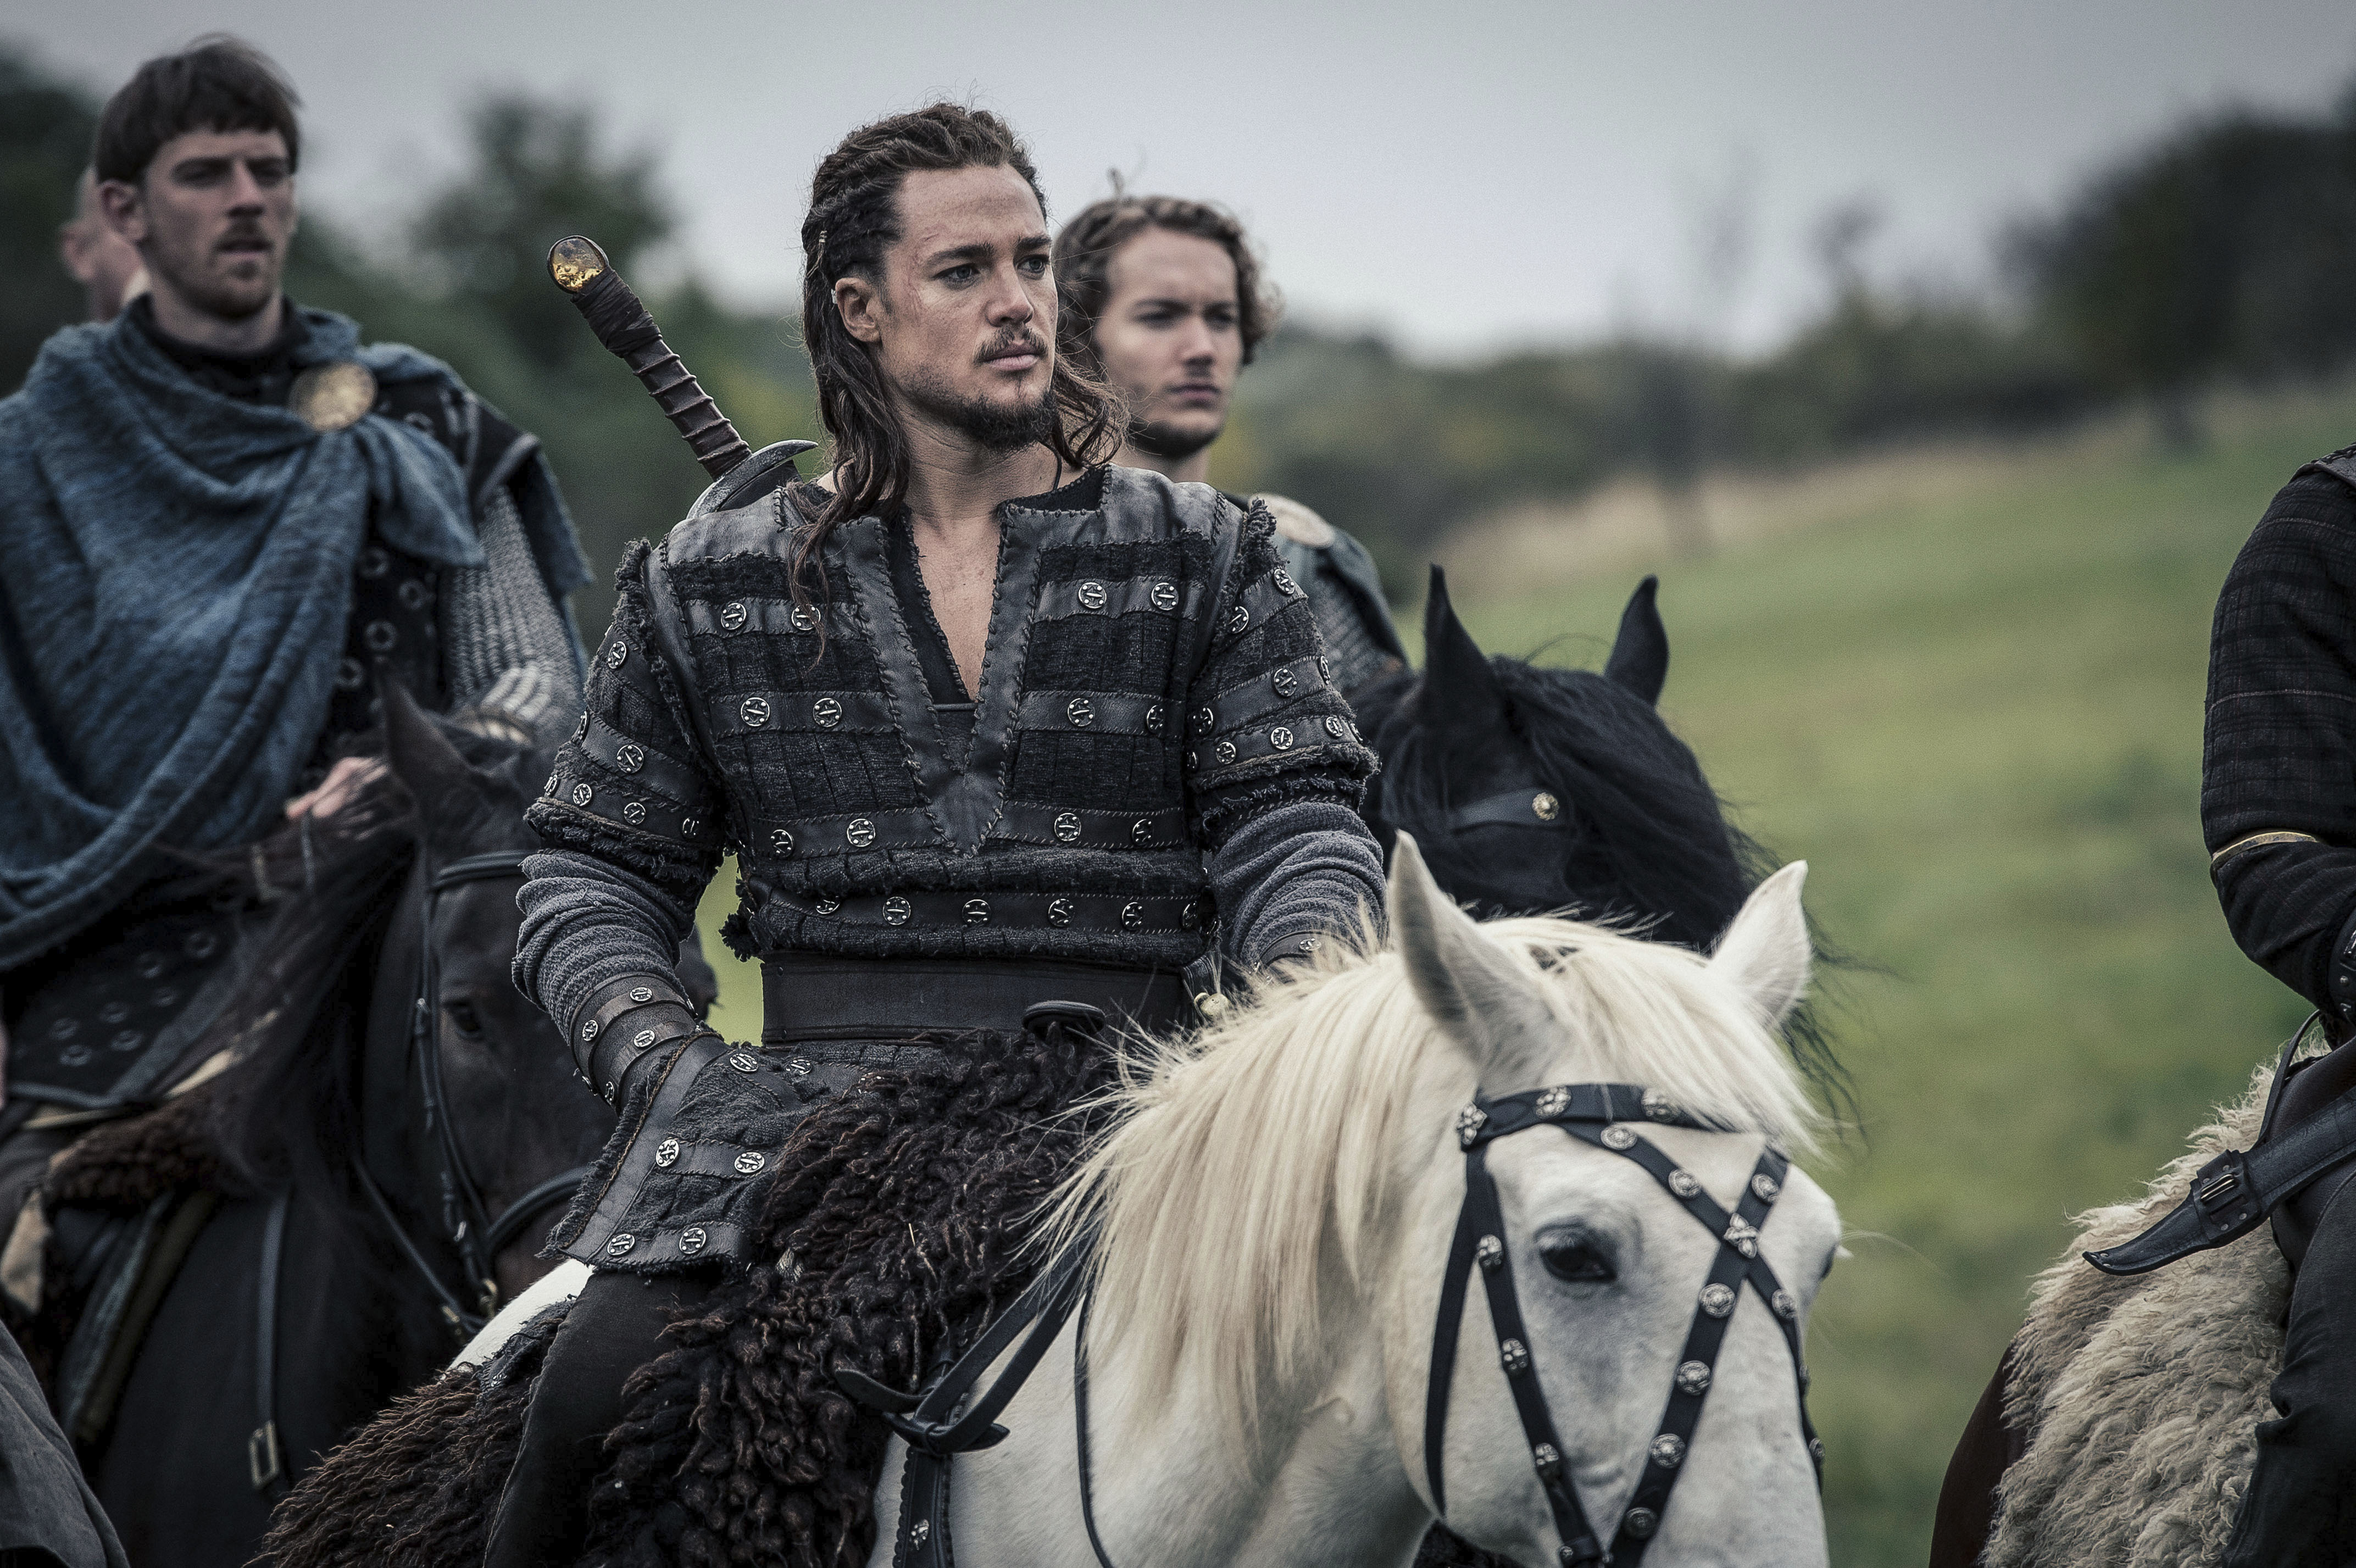 Toby-as-Aethelred-in-The-Last-Kingdom-2x07-Promotional-Stills-toby-regbo-